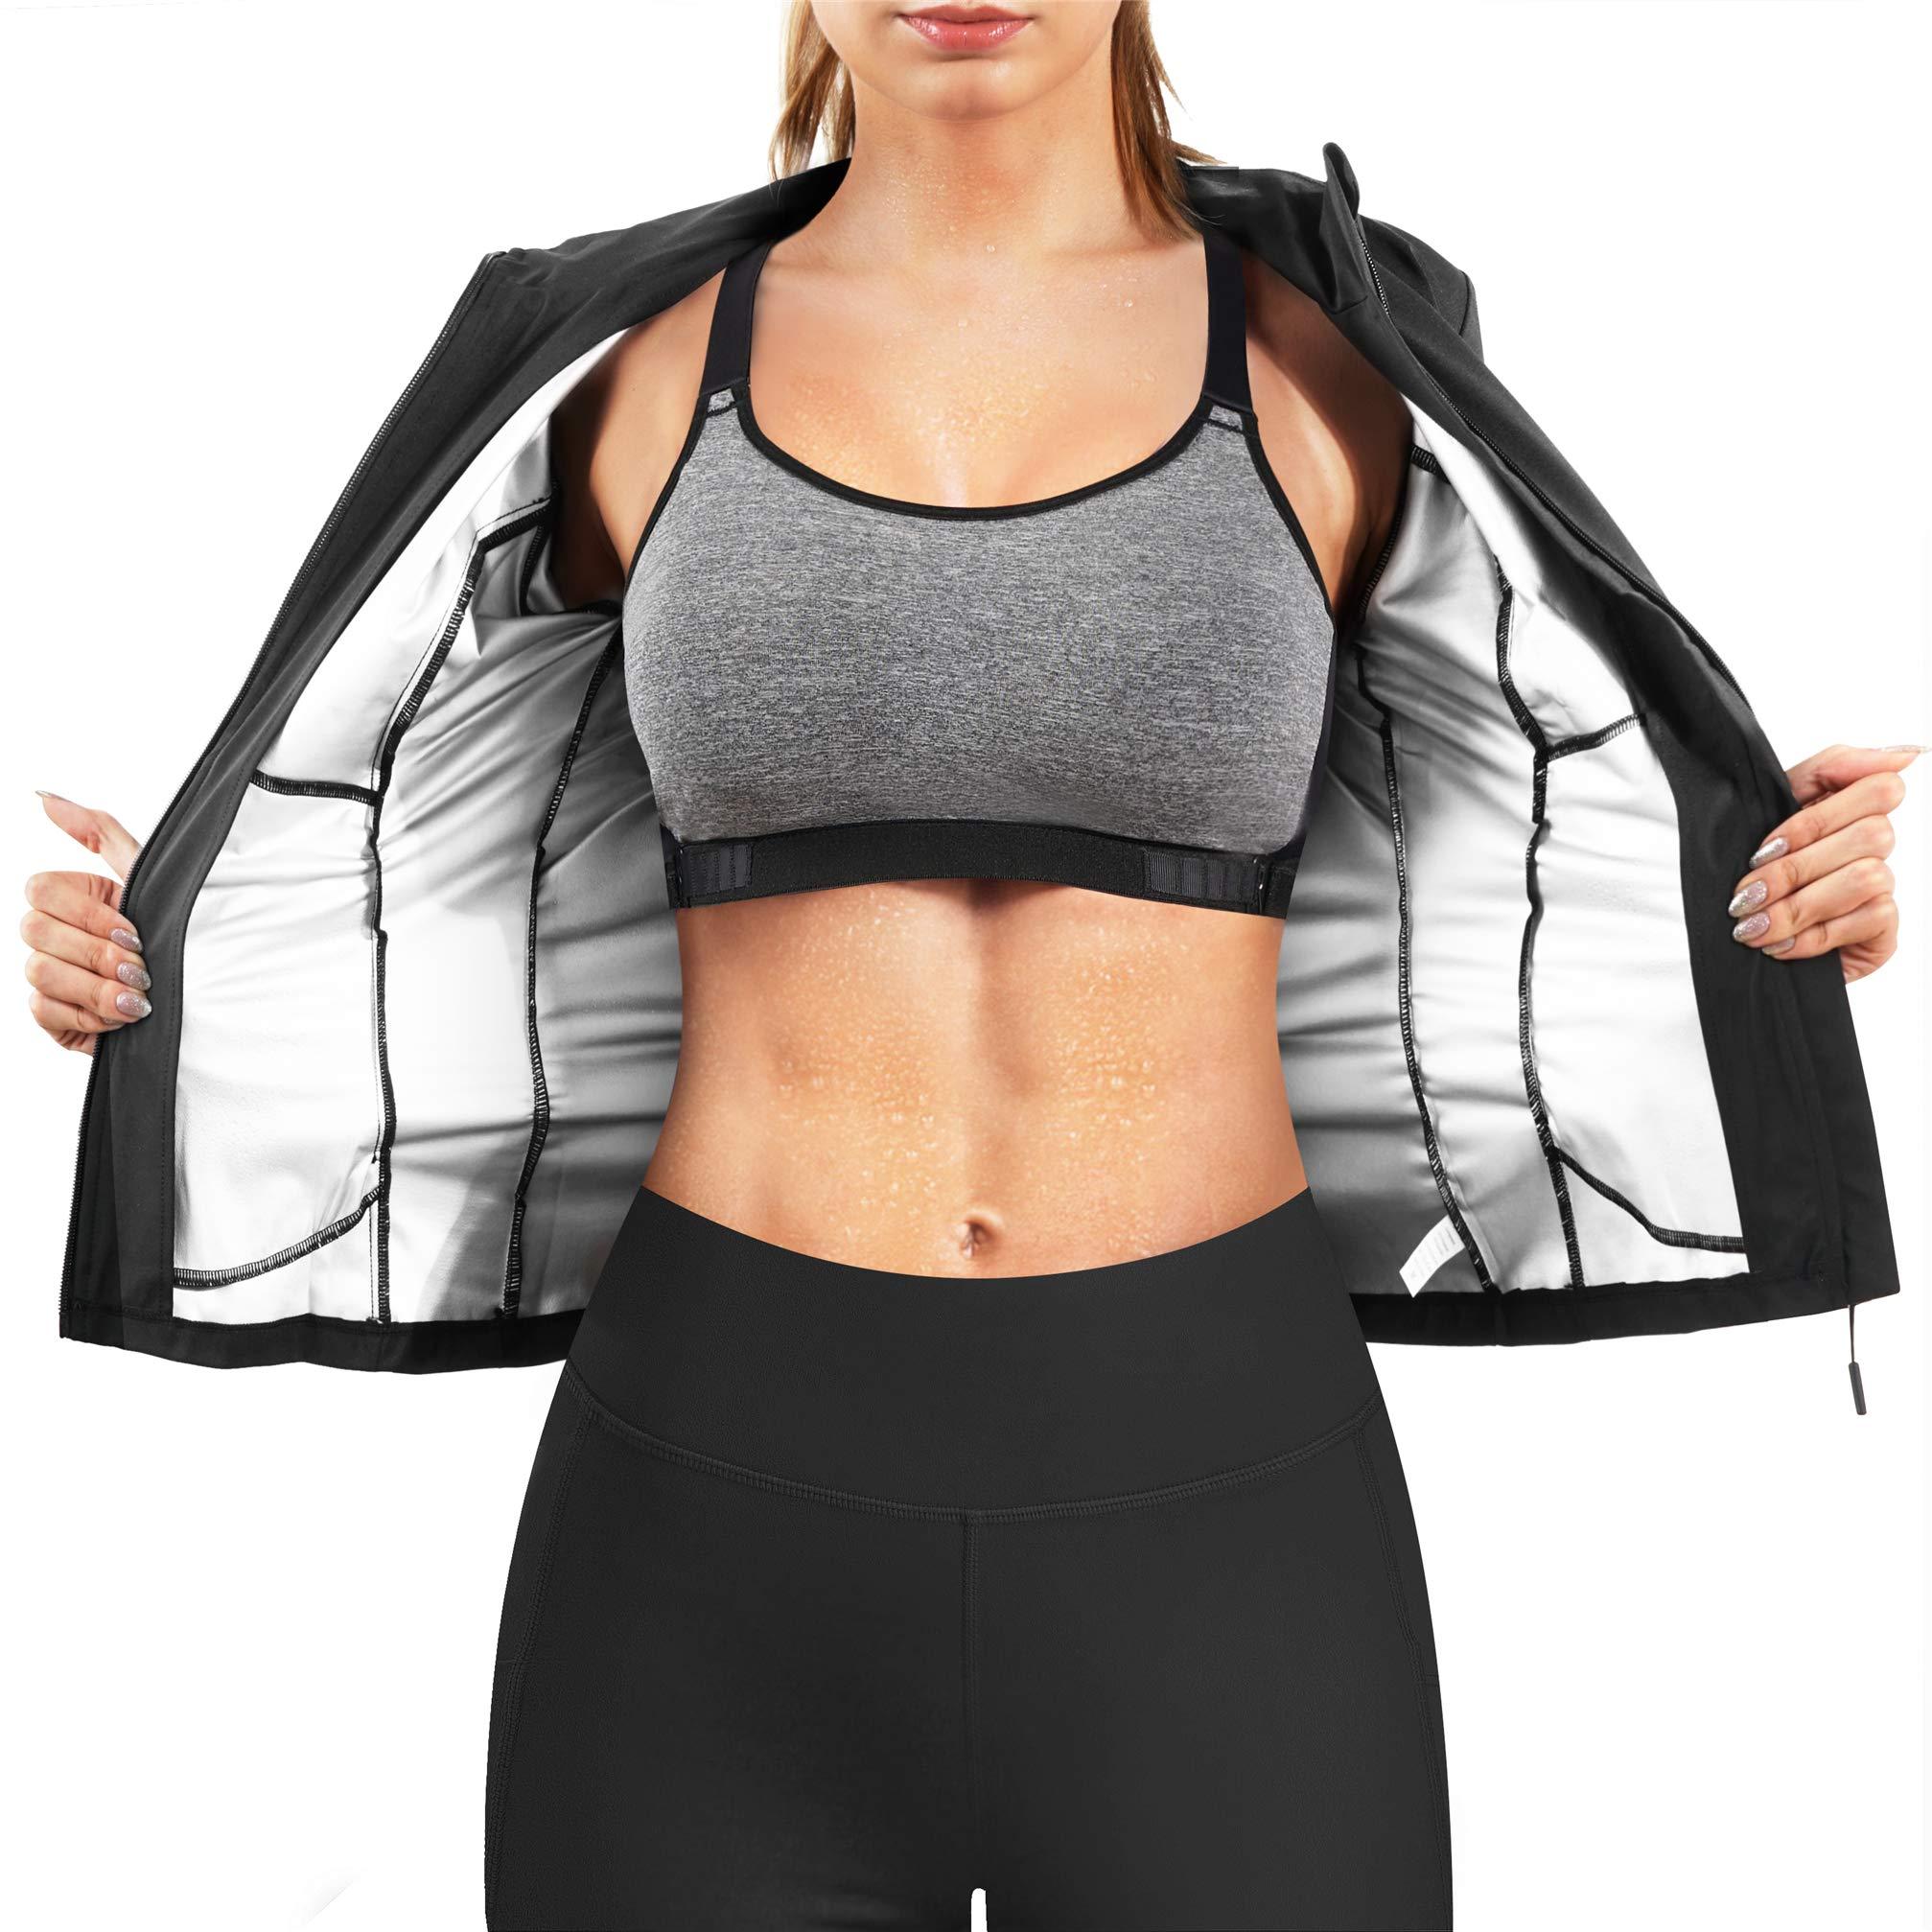 Chumian Women Hot Sweat Sauna Suit Track Jackets Workout Long Sleeve Tank Tops with Zipper Slimming Polymer Waist Trainer (Black, S) 0